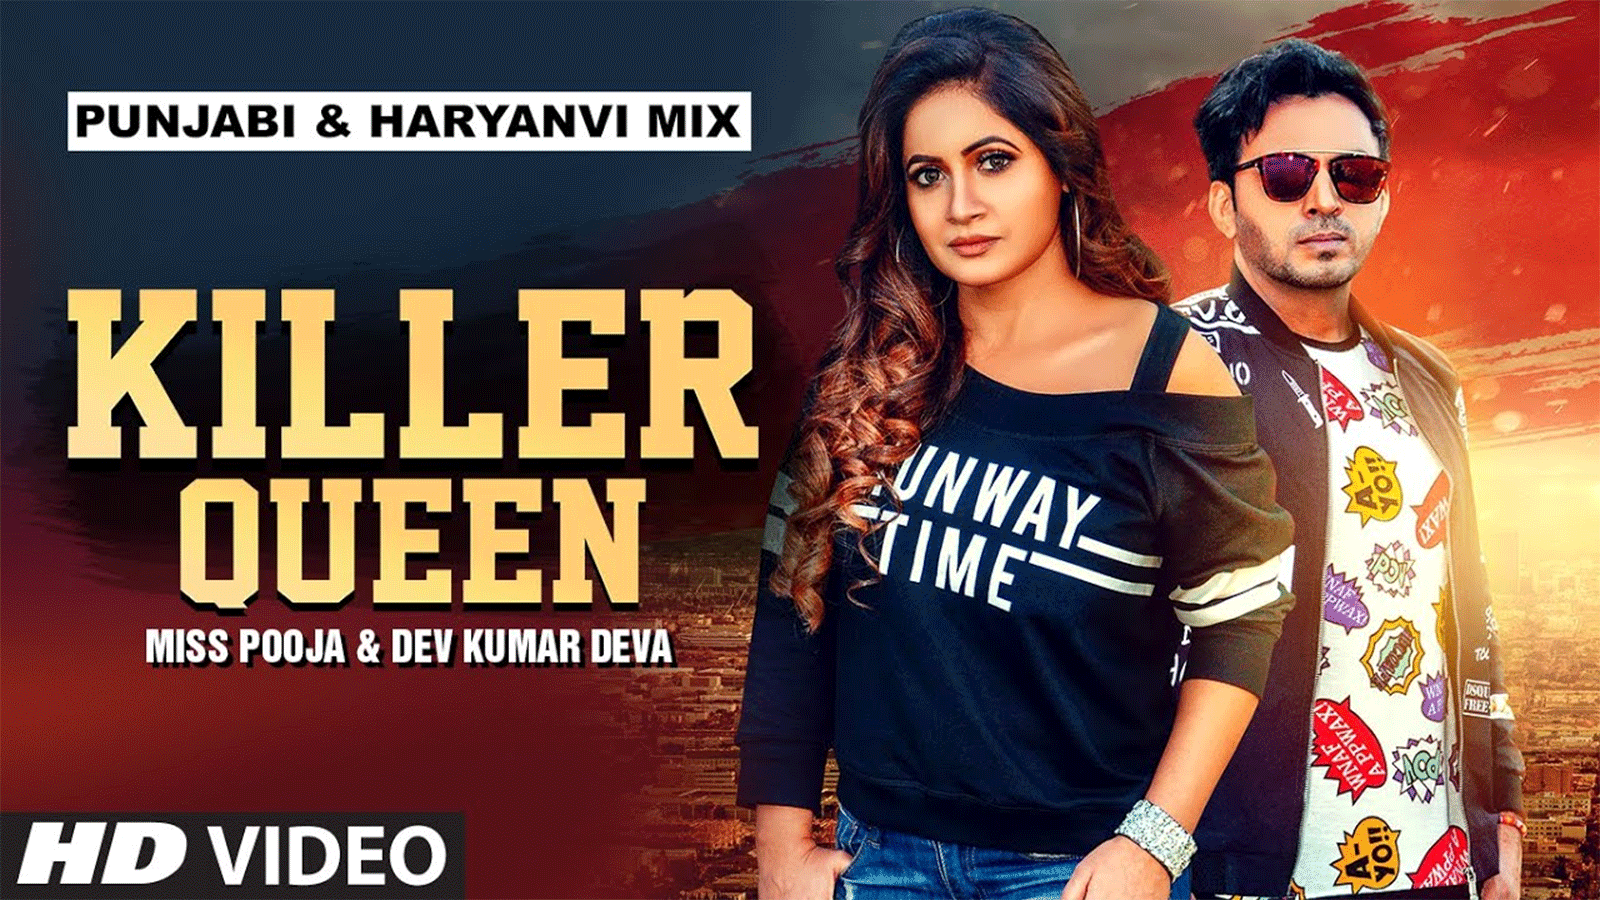 Watch Latest 21 Punjabi Song Killer Queen Sung By Miss Pooja And Dev Kumar Deva Punjabi Video Songs Times Of India